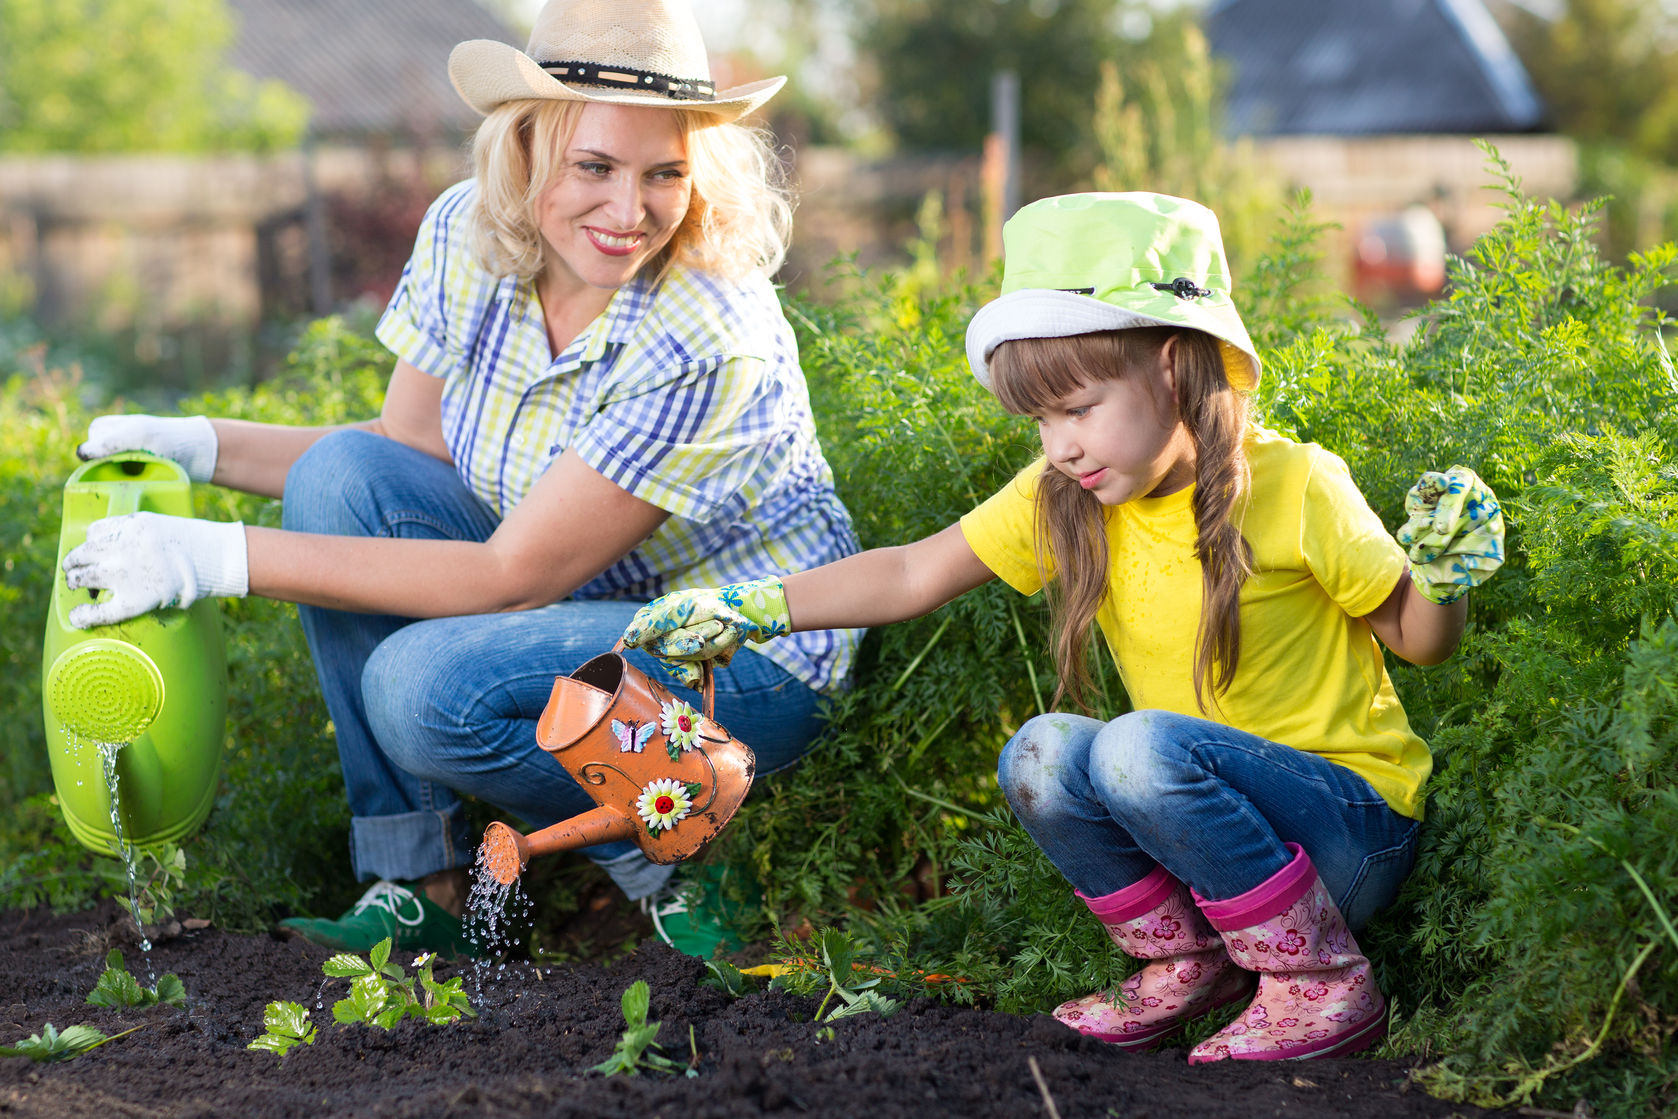 Kiddos Magazine | An Outdoor Learning Activity for Kids to do this Summer